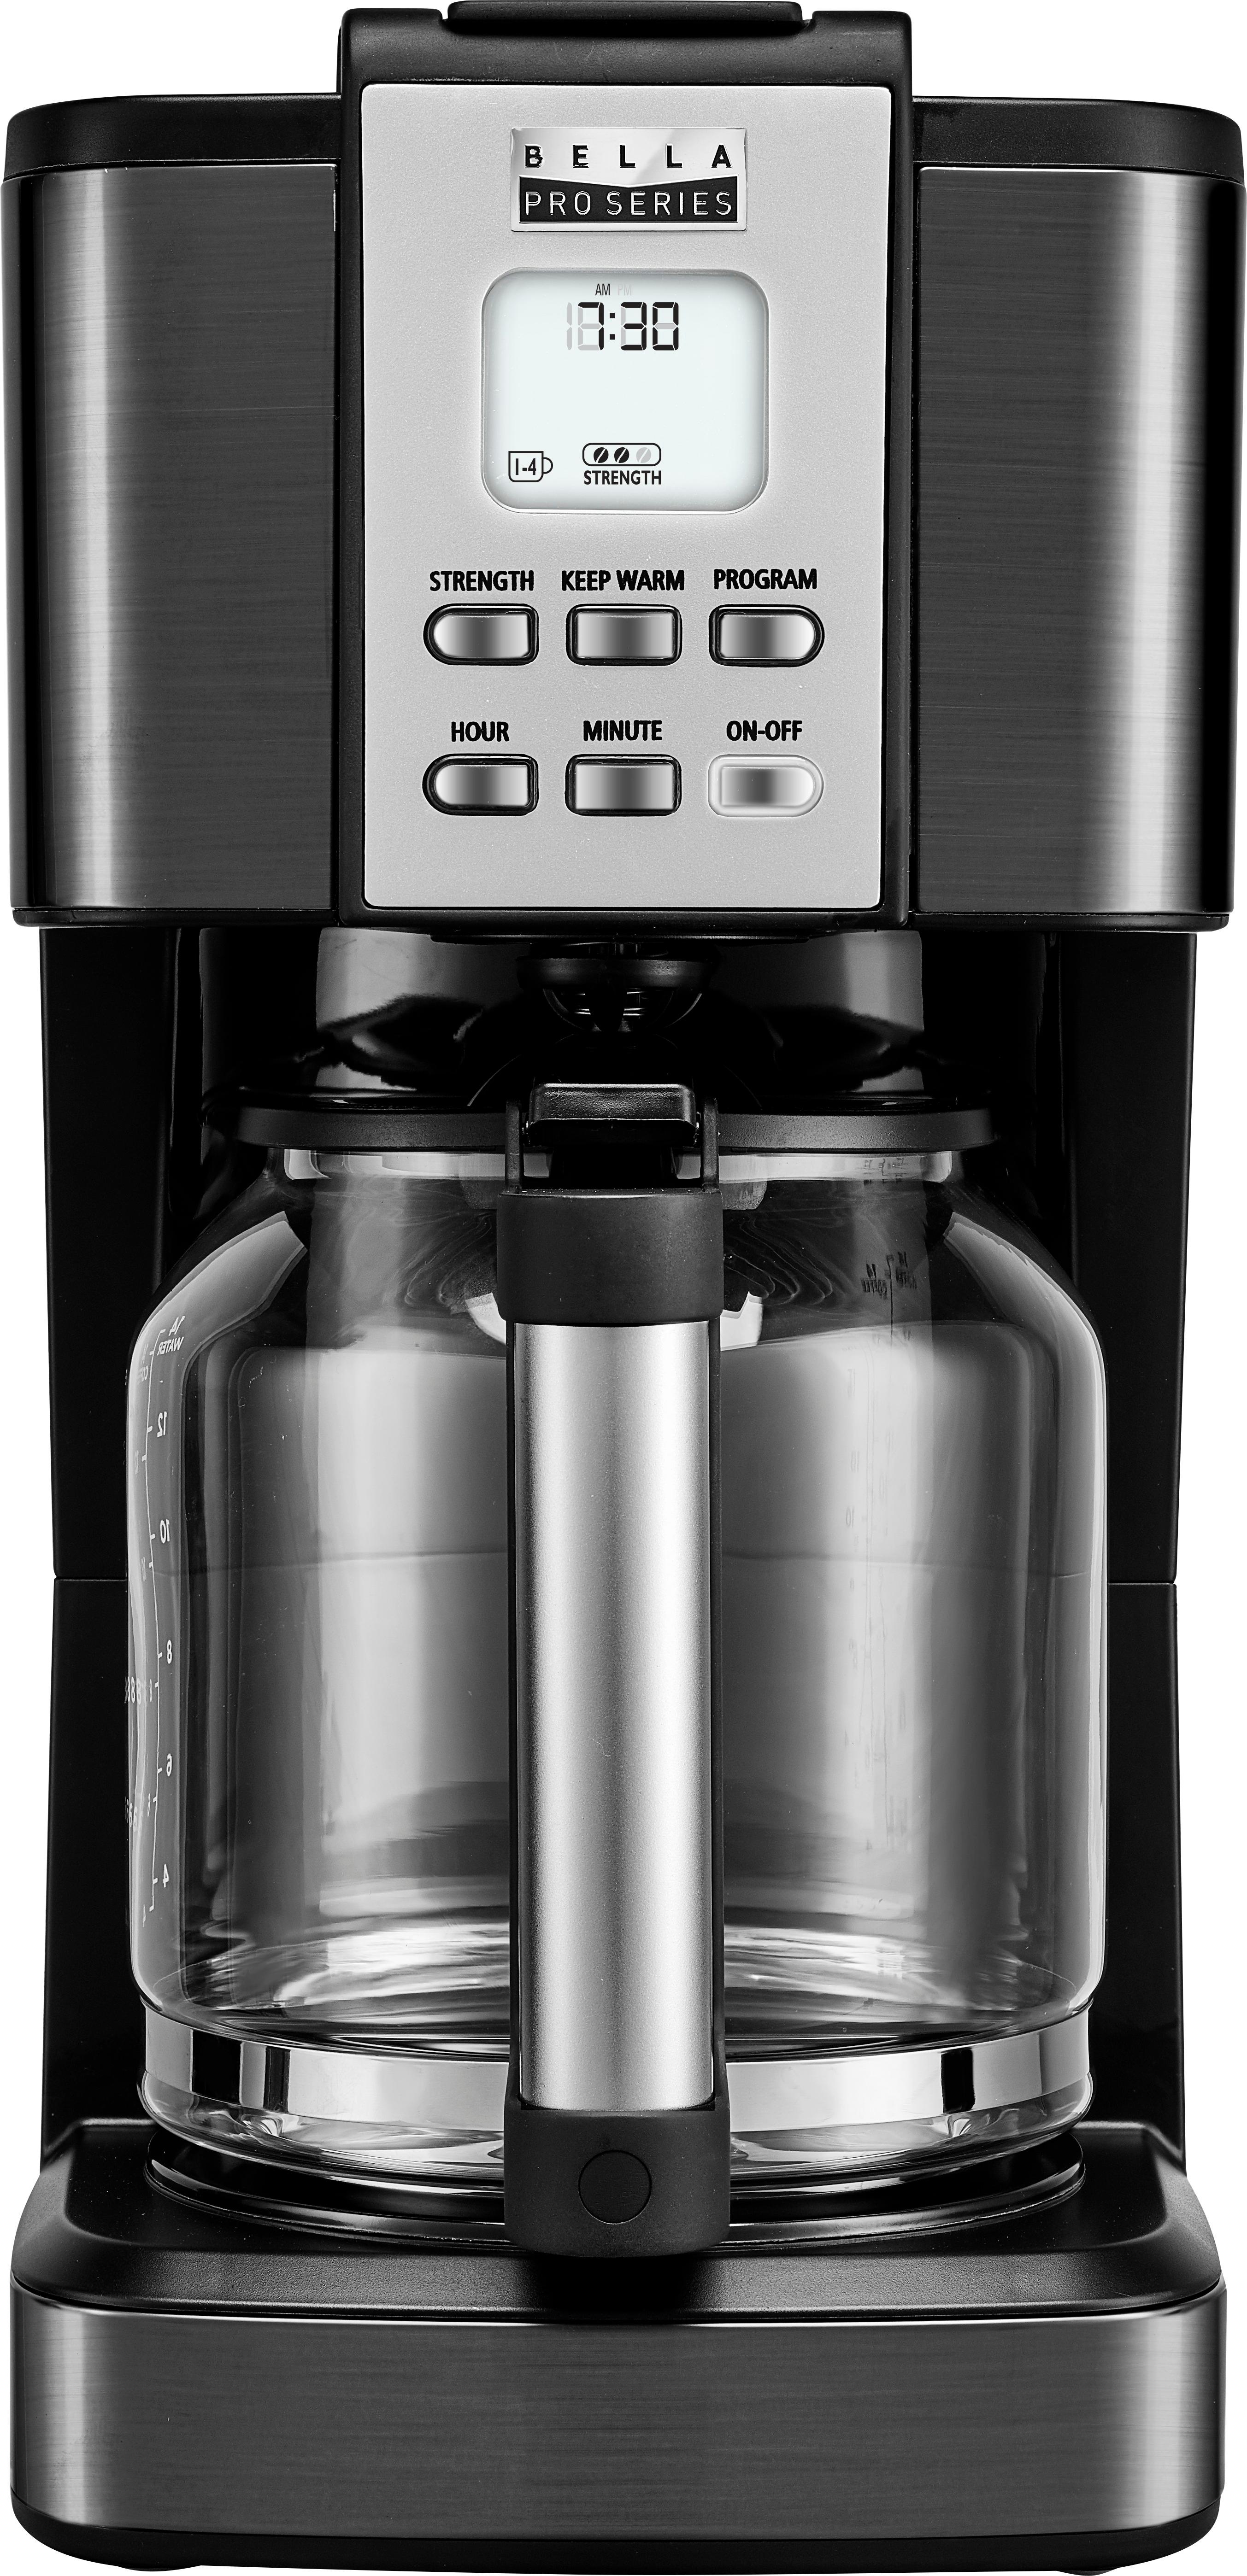  BELLA One Scoop One Cup Coffee Maker, Single Serve Brewer with  Adjustable Drip Tray and Permanent Filter, Dishwasher Safe, Stainless Steel  and Black: Home & Kitchen